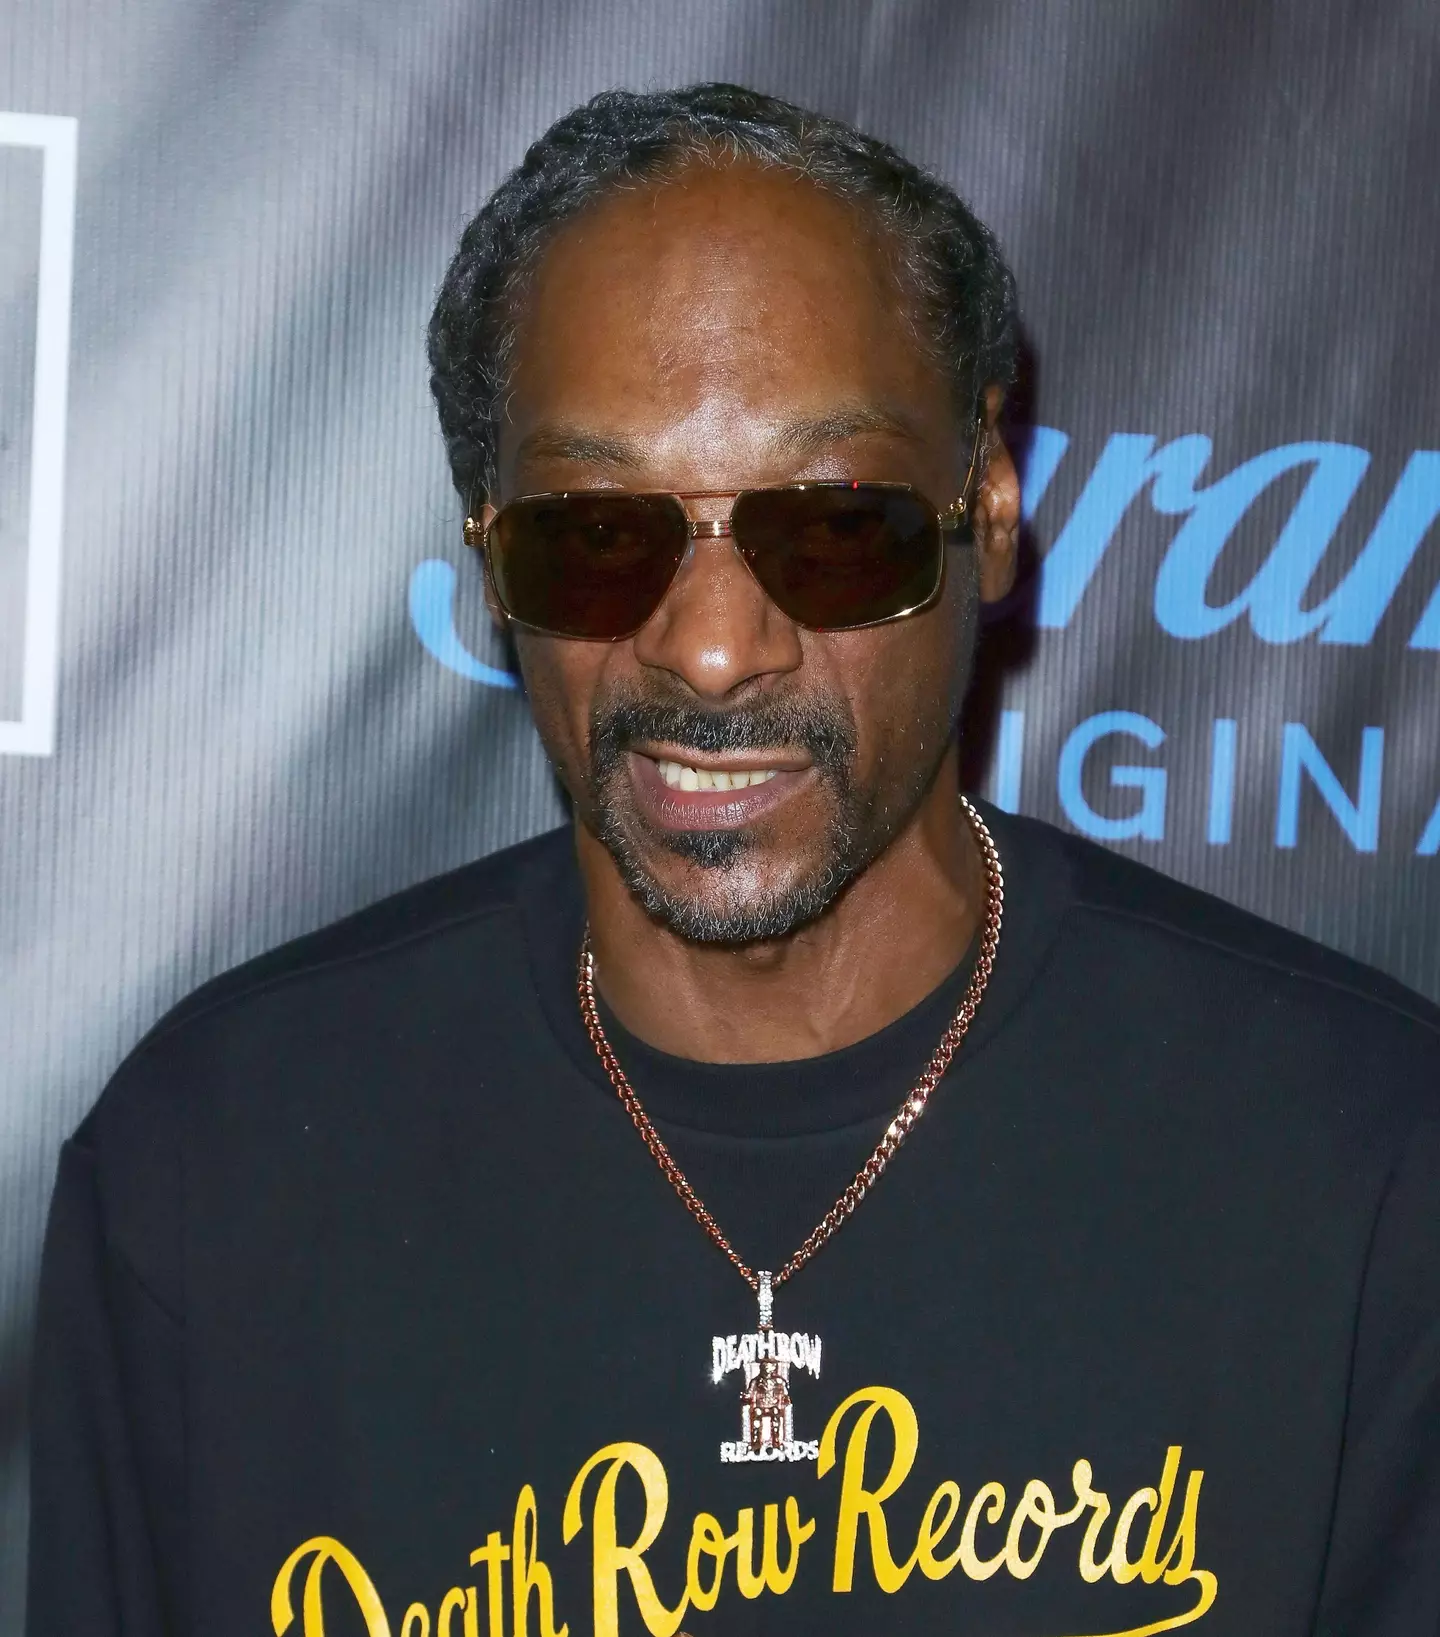 Snoop Dogg took to Instagram to shed light on the situation.